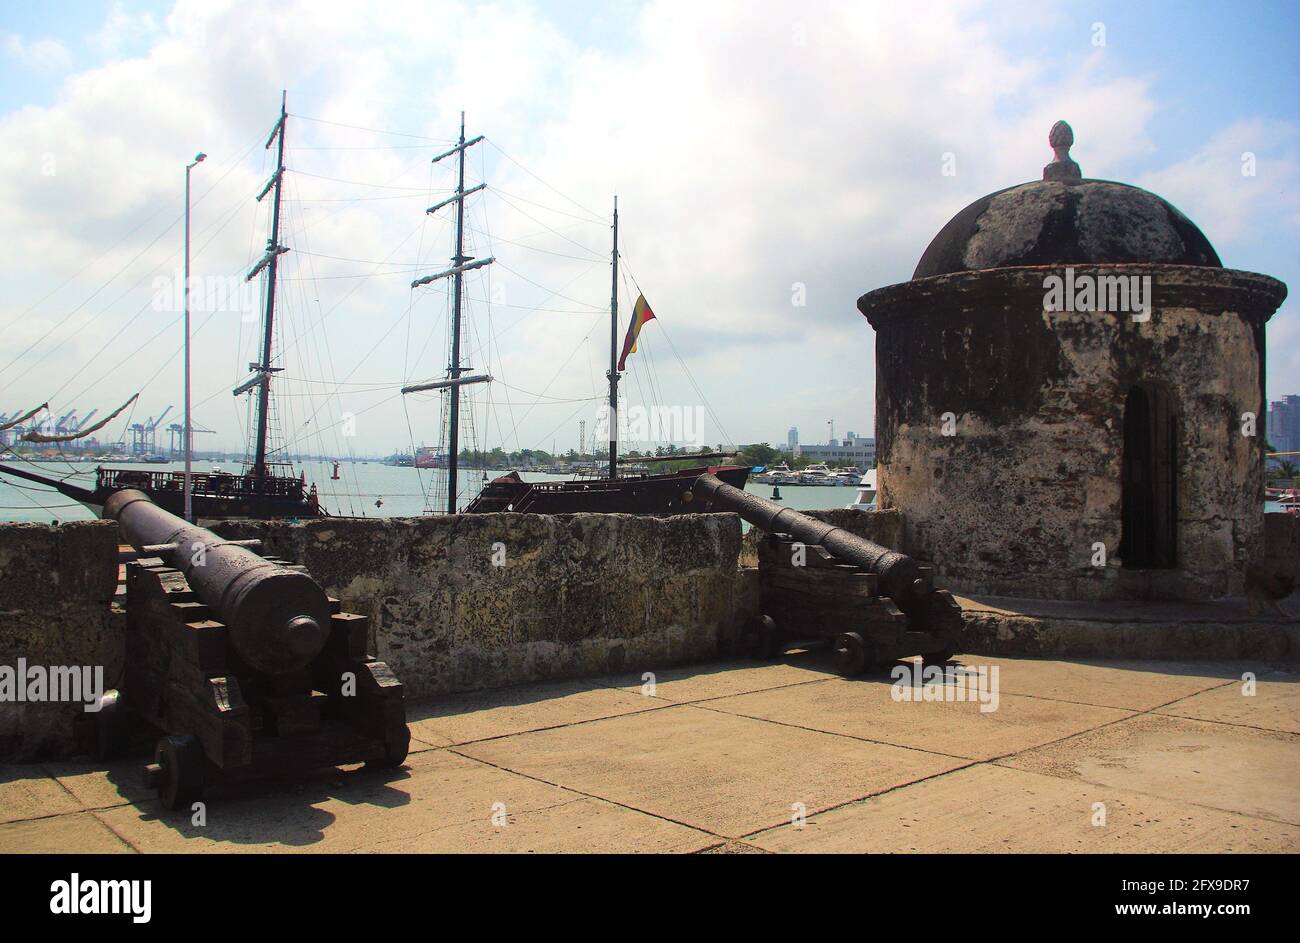 Ancient city walls with fortifications overlooking the harbour, Cartagena, Colombia, South America Stock Photo